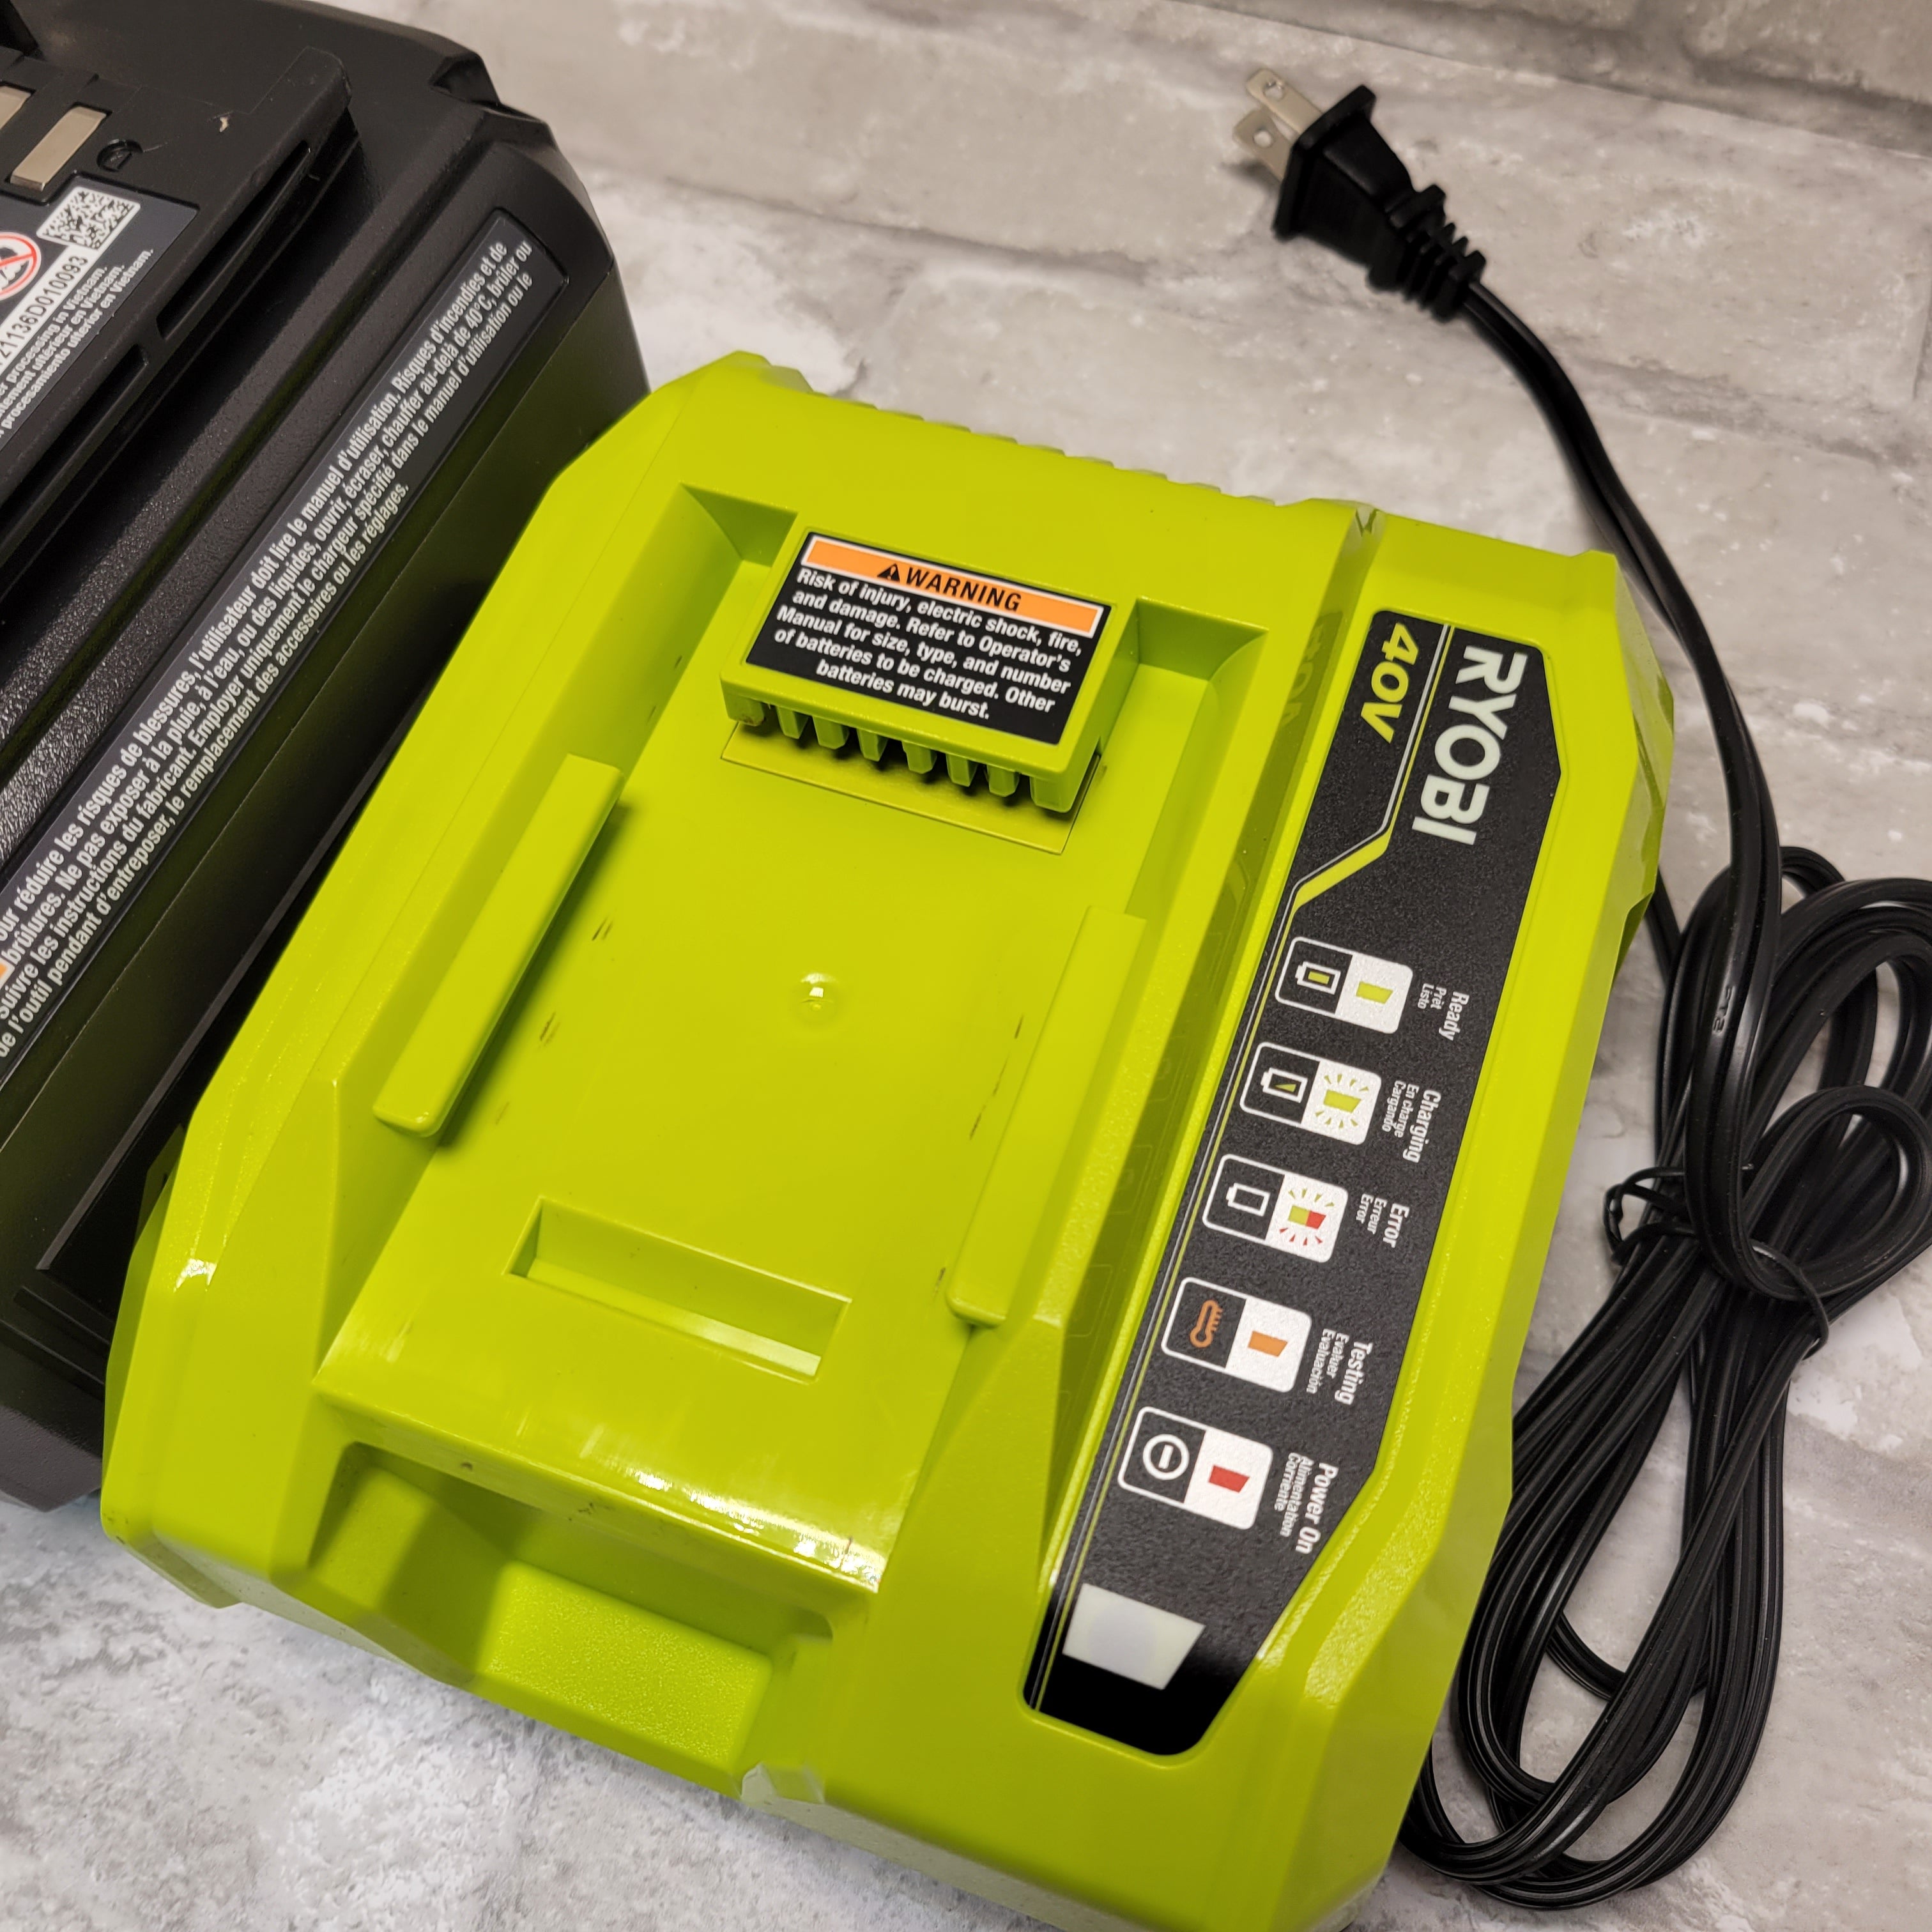 RYOBI 40V Lithium-Ion 6.0 Ah Battery and Rapid Charger Starter Kit (2-Batteries) (7937414988014)